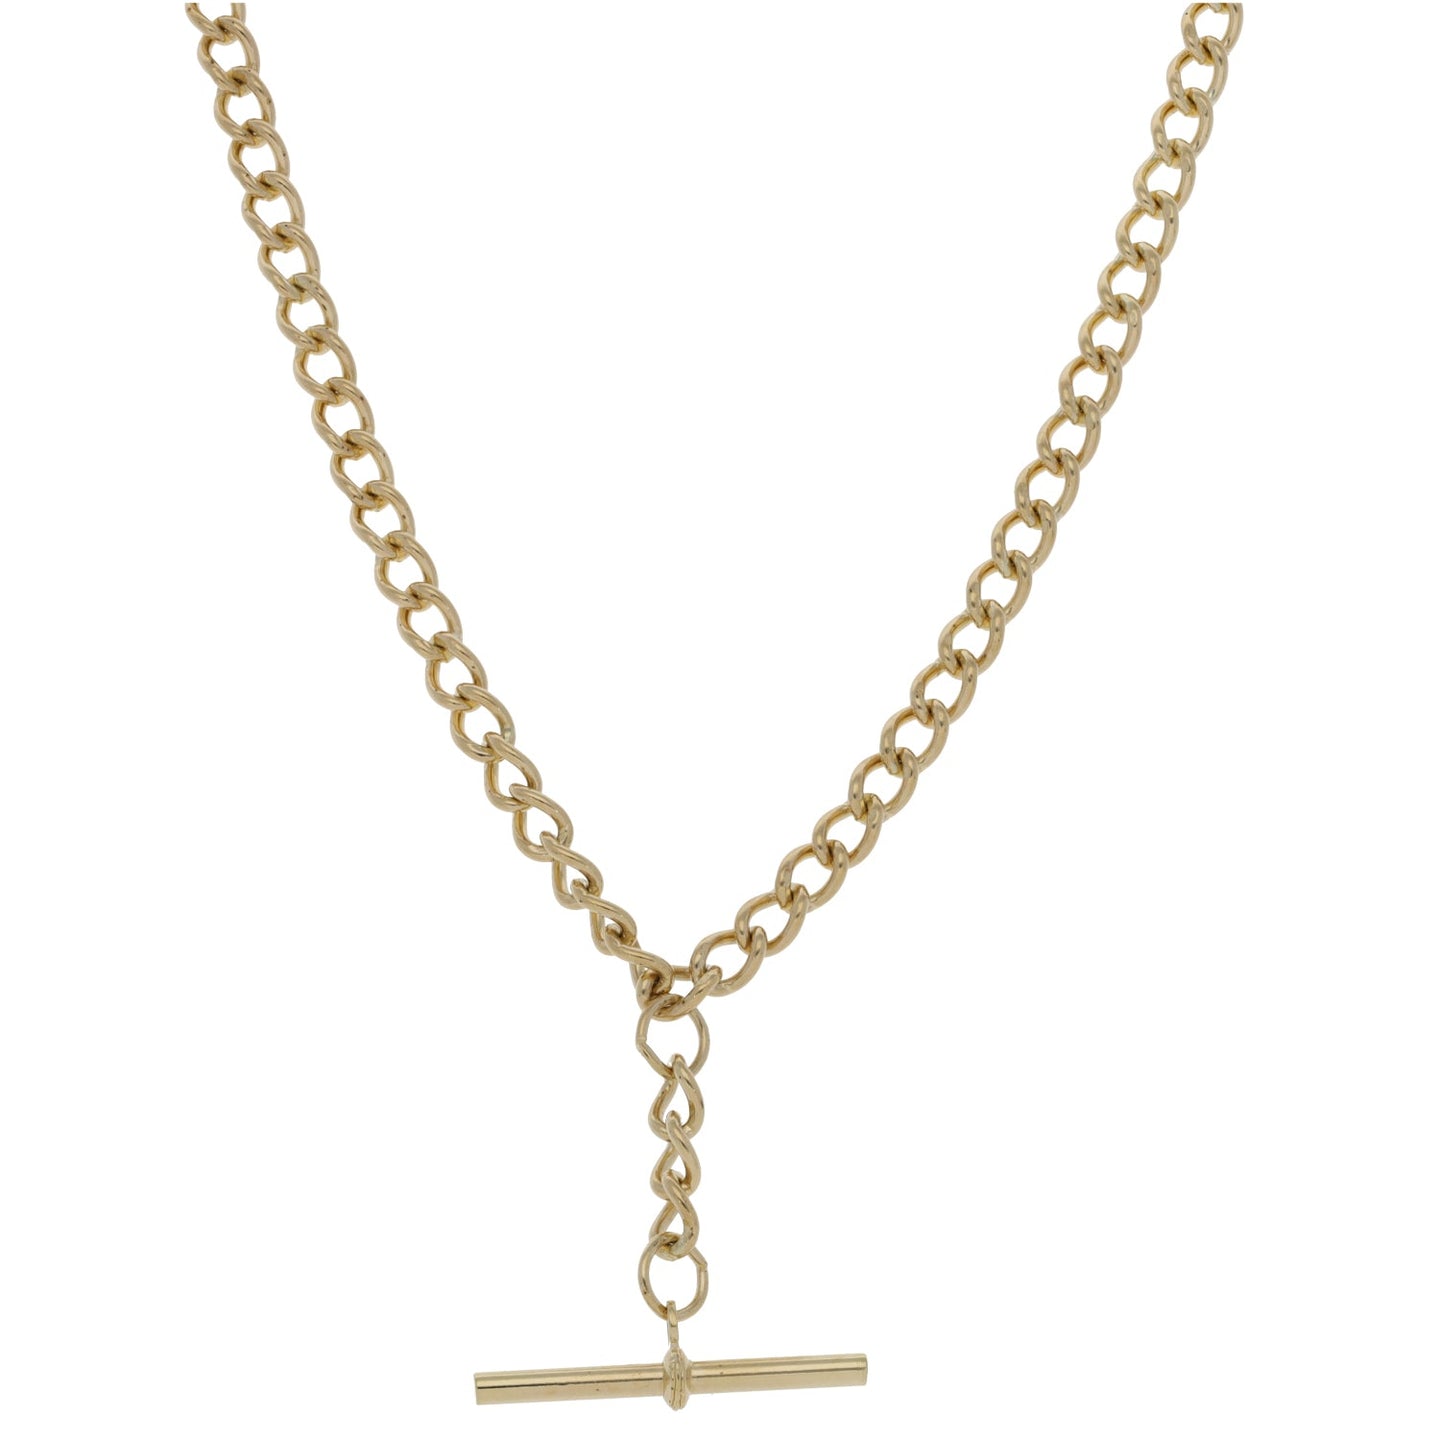 9ct Gold Fob/Watch Chain 18